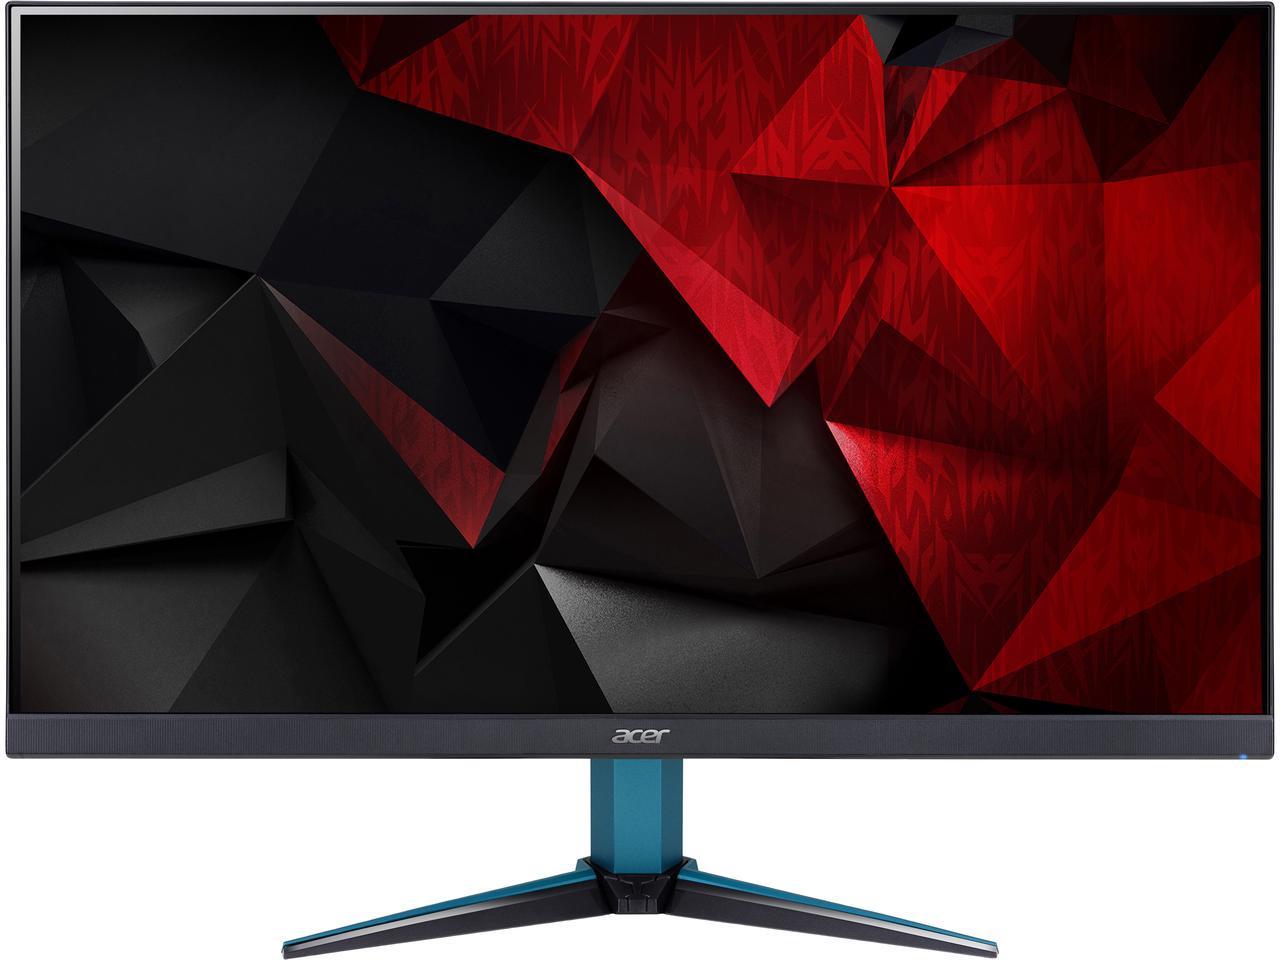 G Story 27 Inch Hdr 144hz 1ms Wqhd 2560x1440p Eye Care Gaming Monitor With Amd F For Sale Online Ebay